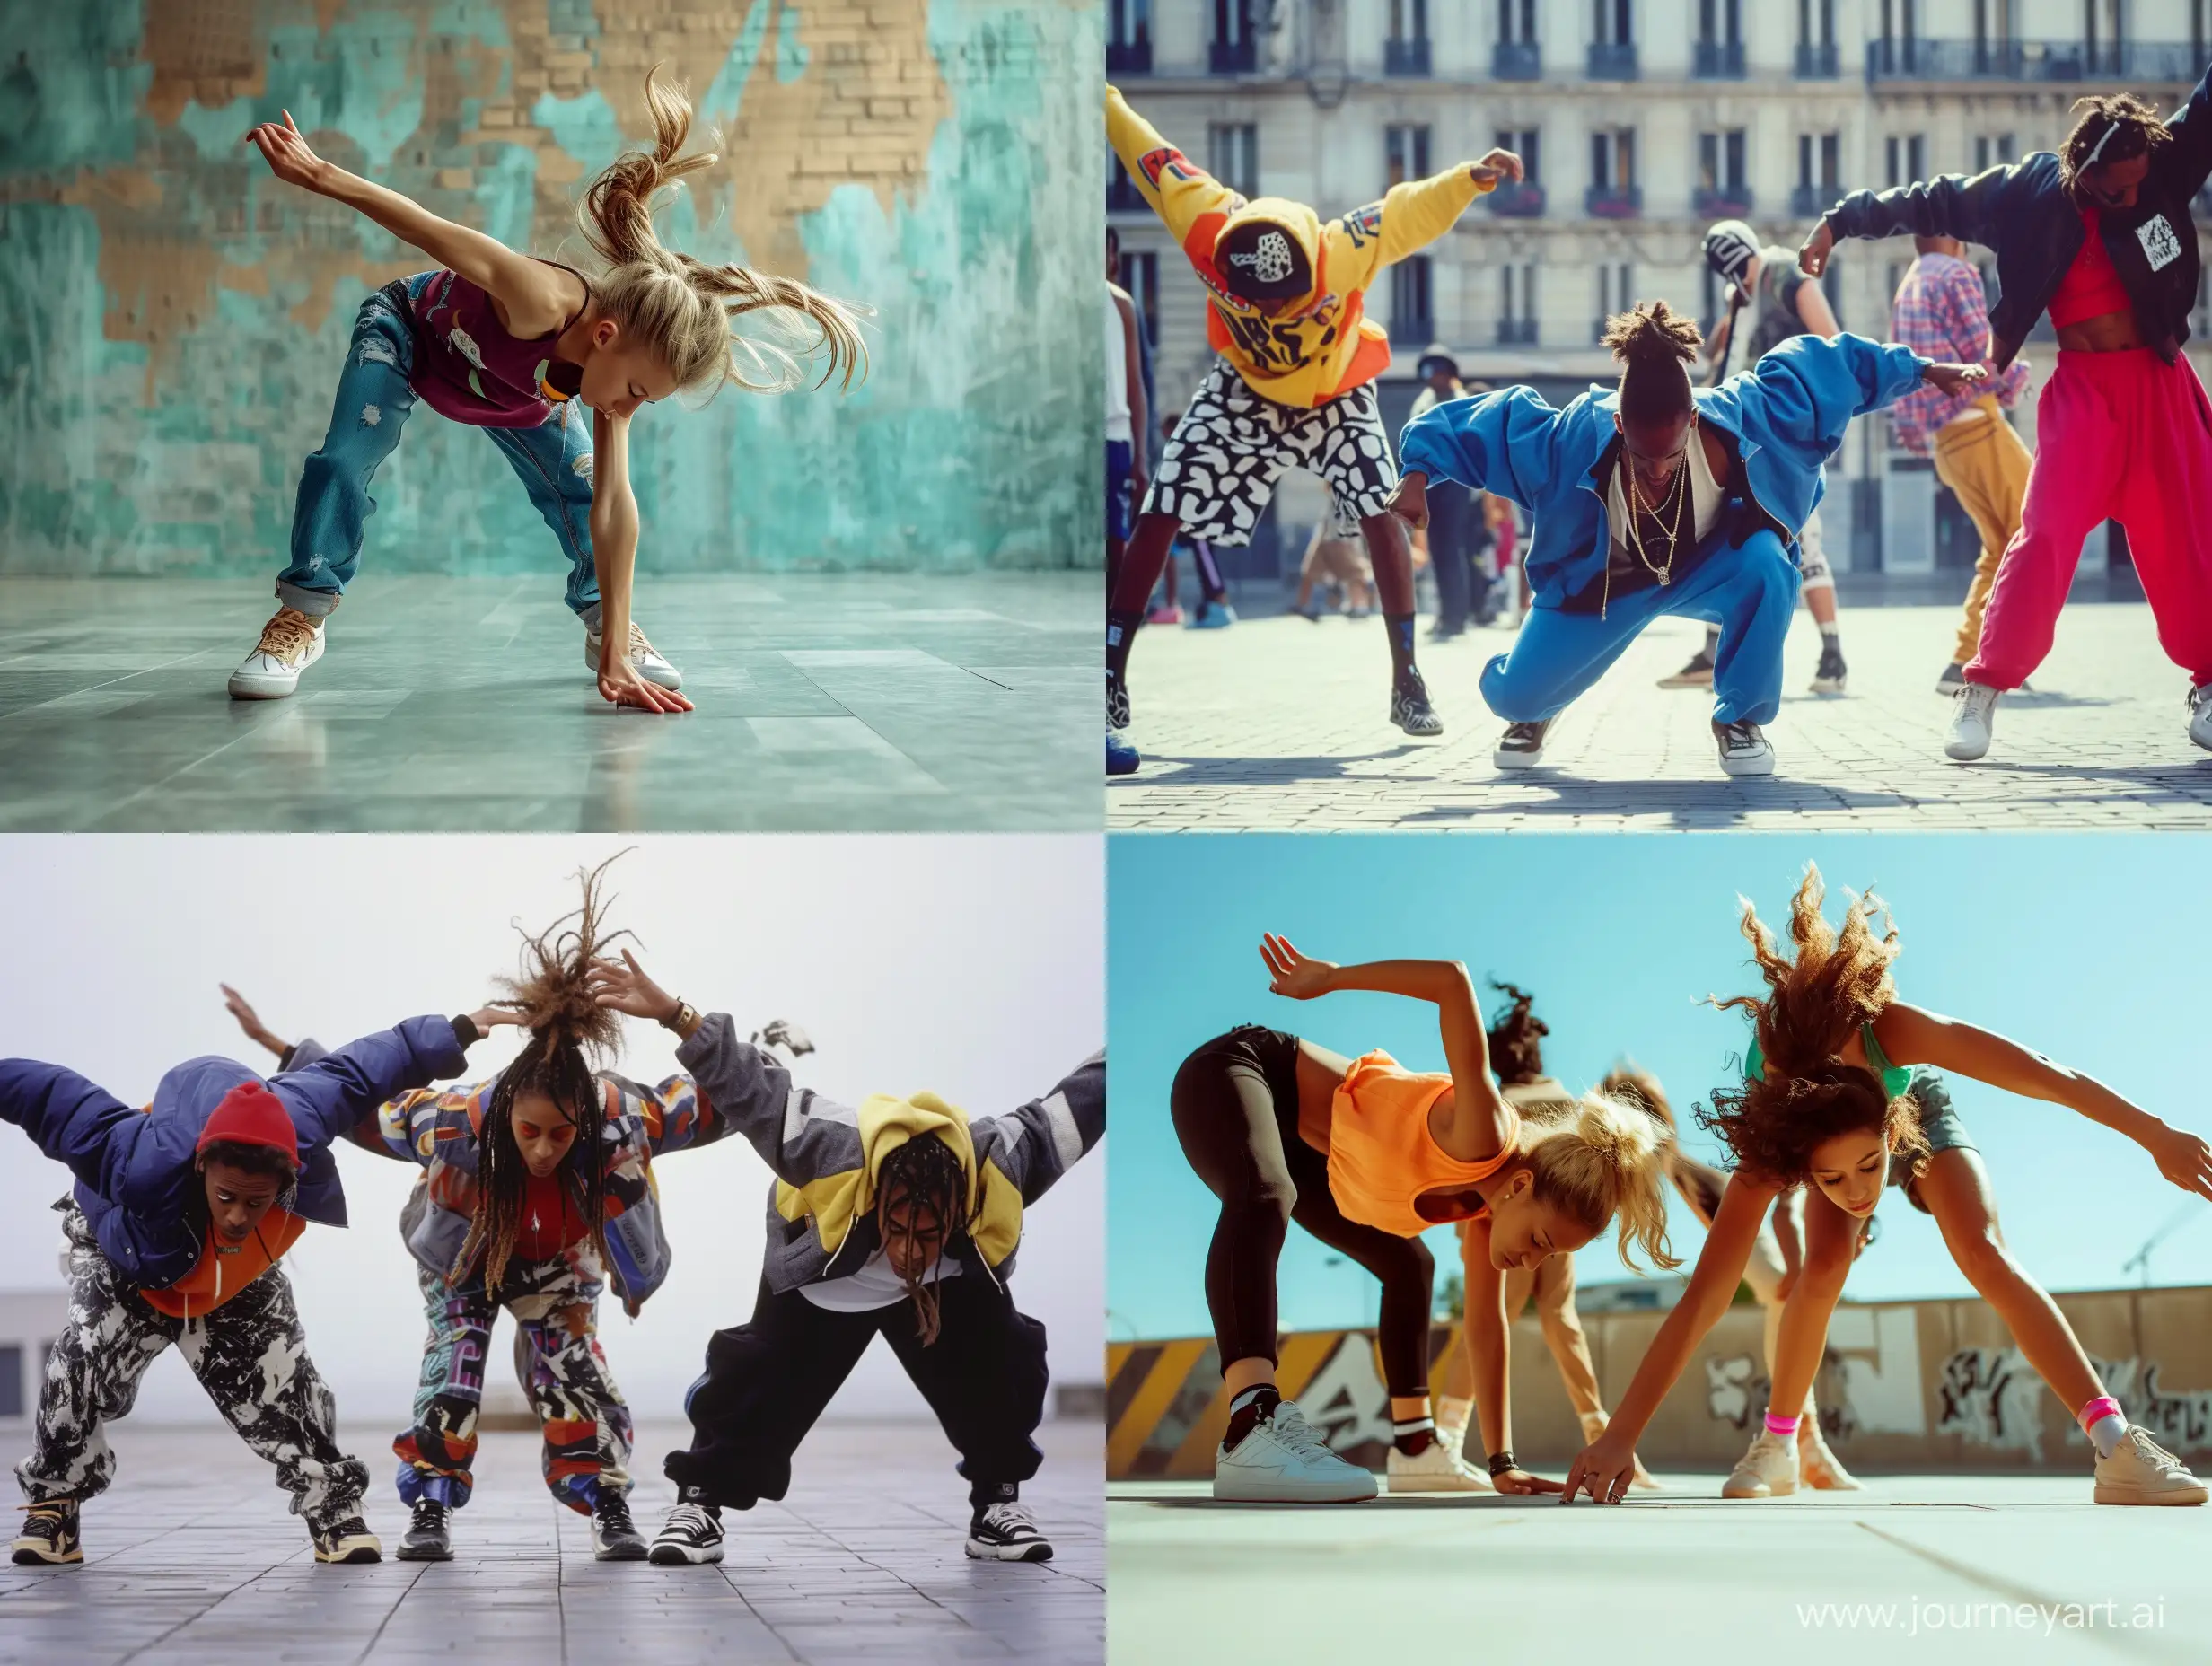 Dynamic-90s-Street-Dance-Energetic-Moves-and-Sporty-Style